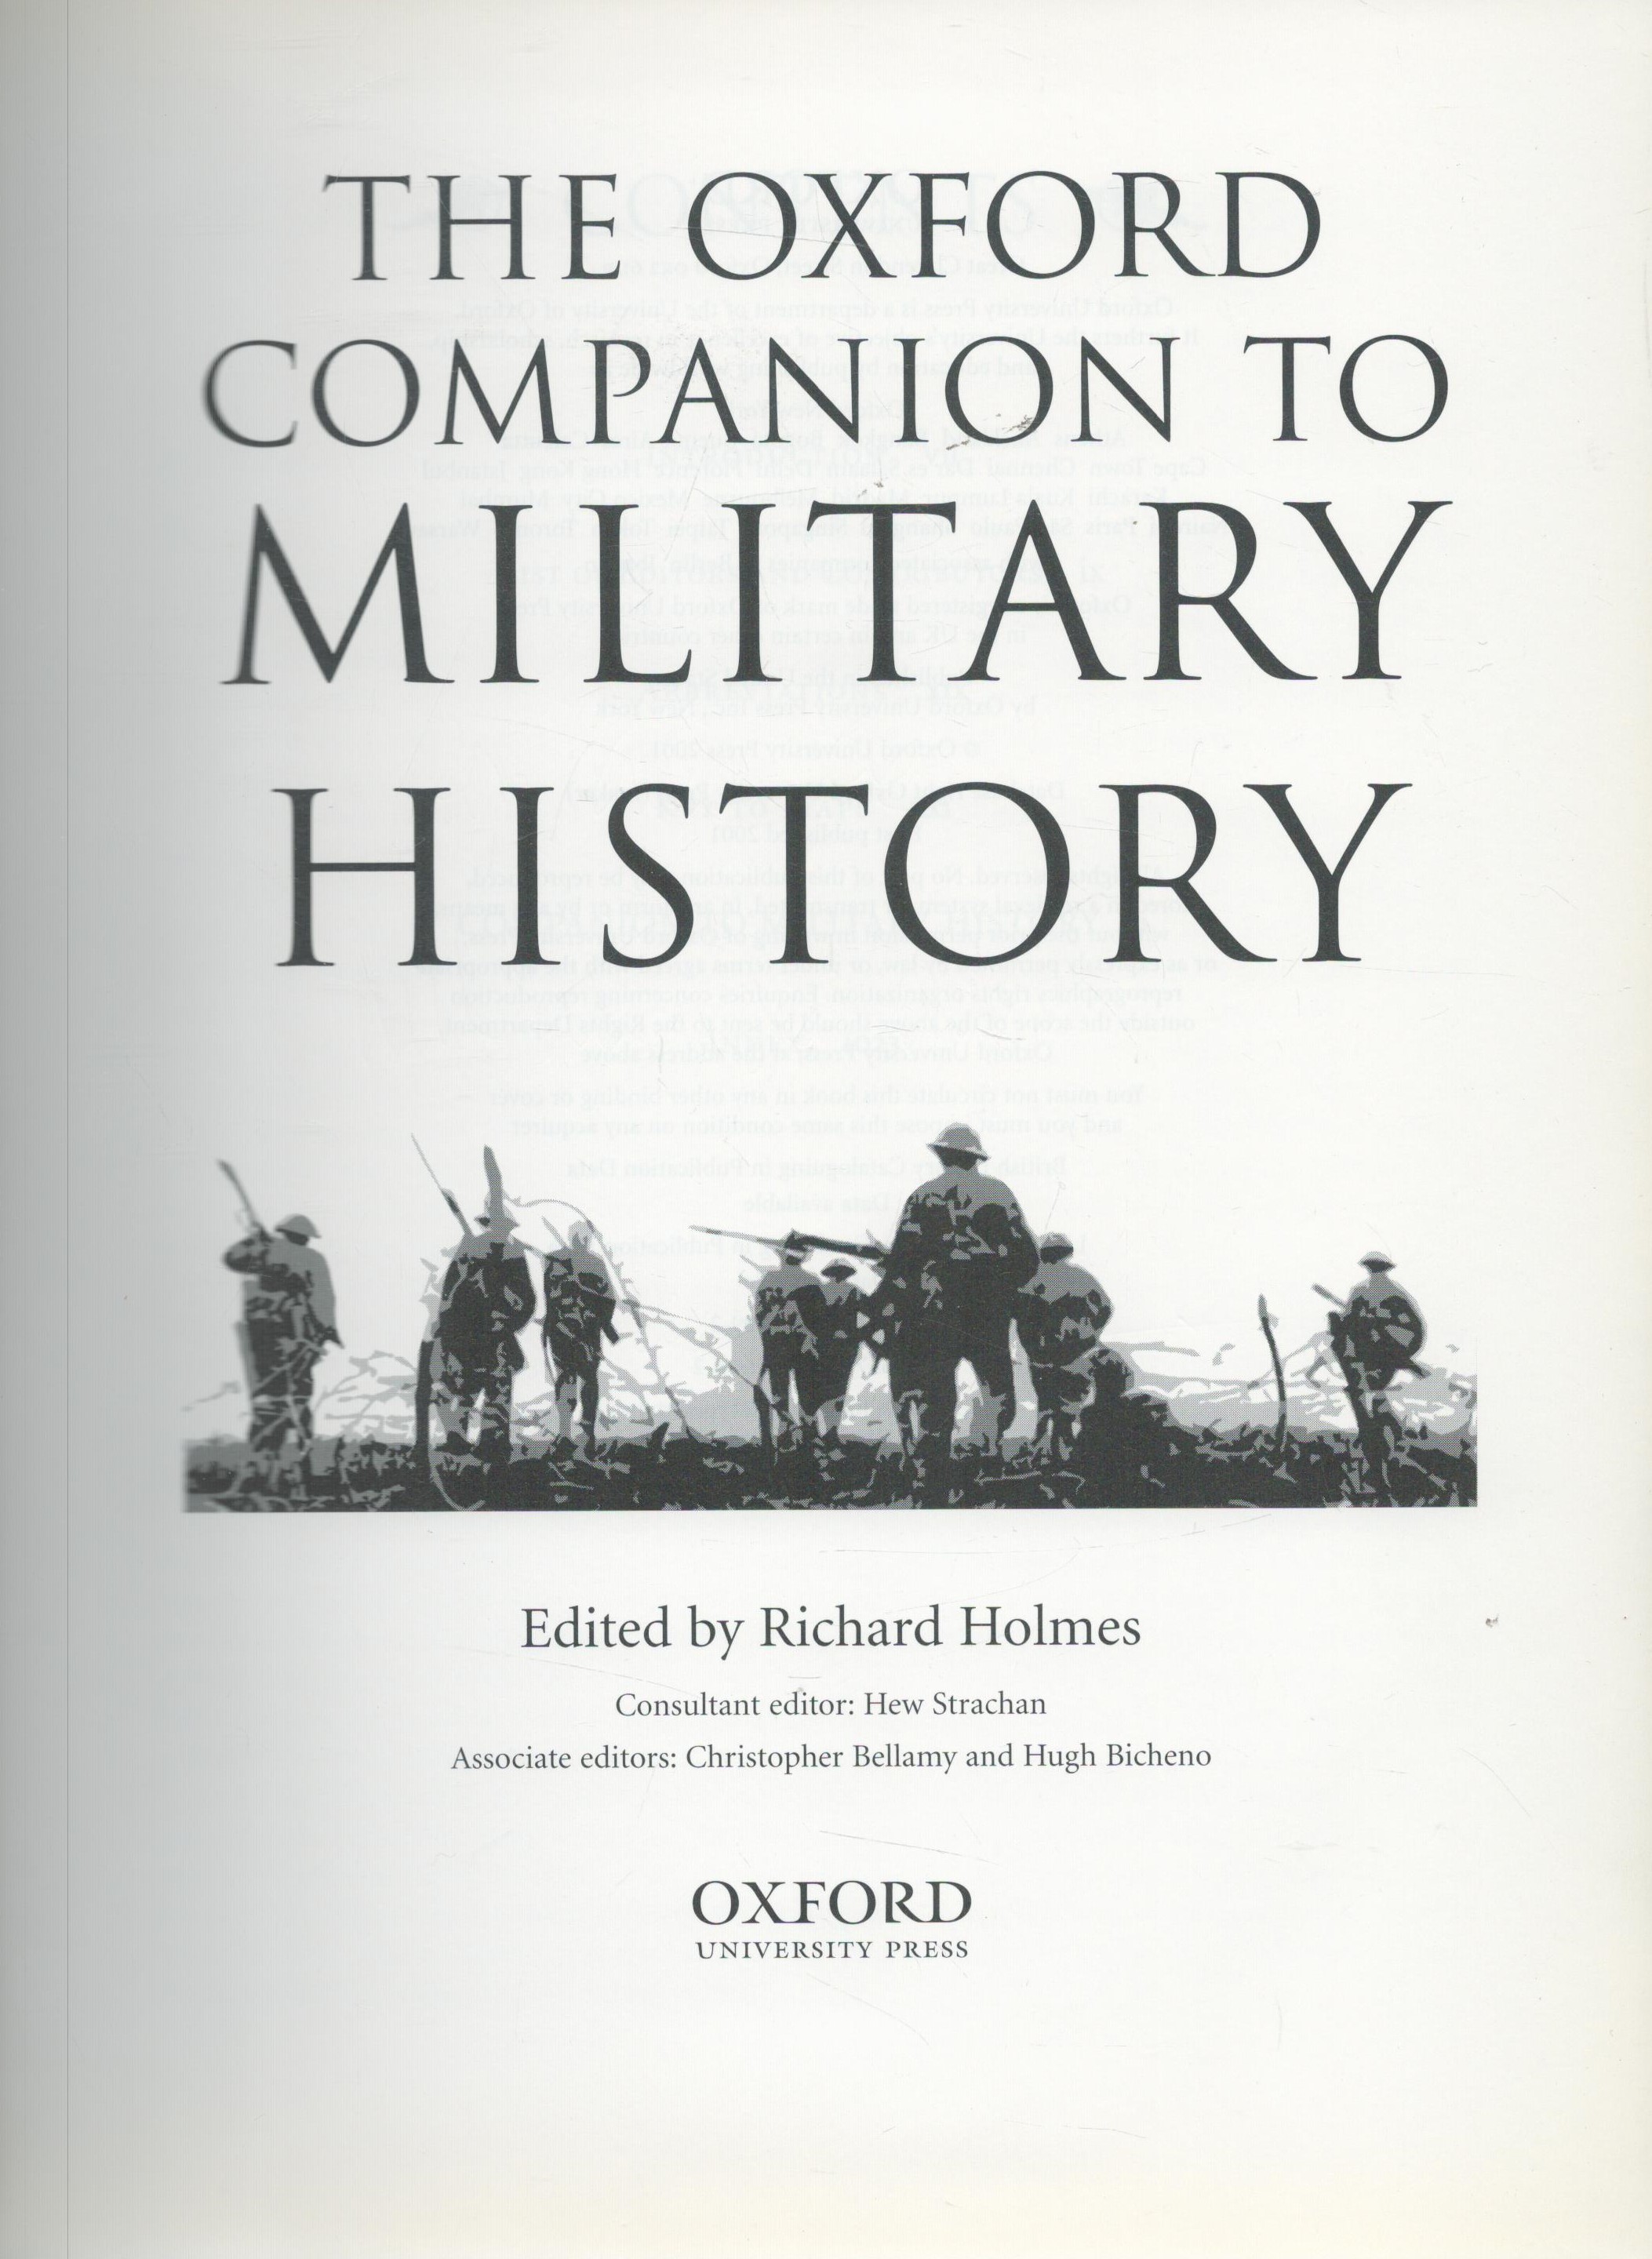 The Oxford Companion to Military History edited and signed by Richard Holmes. First Edition hardback - Image 3 of 4